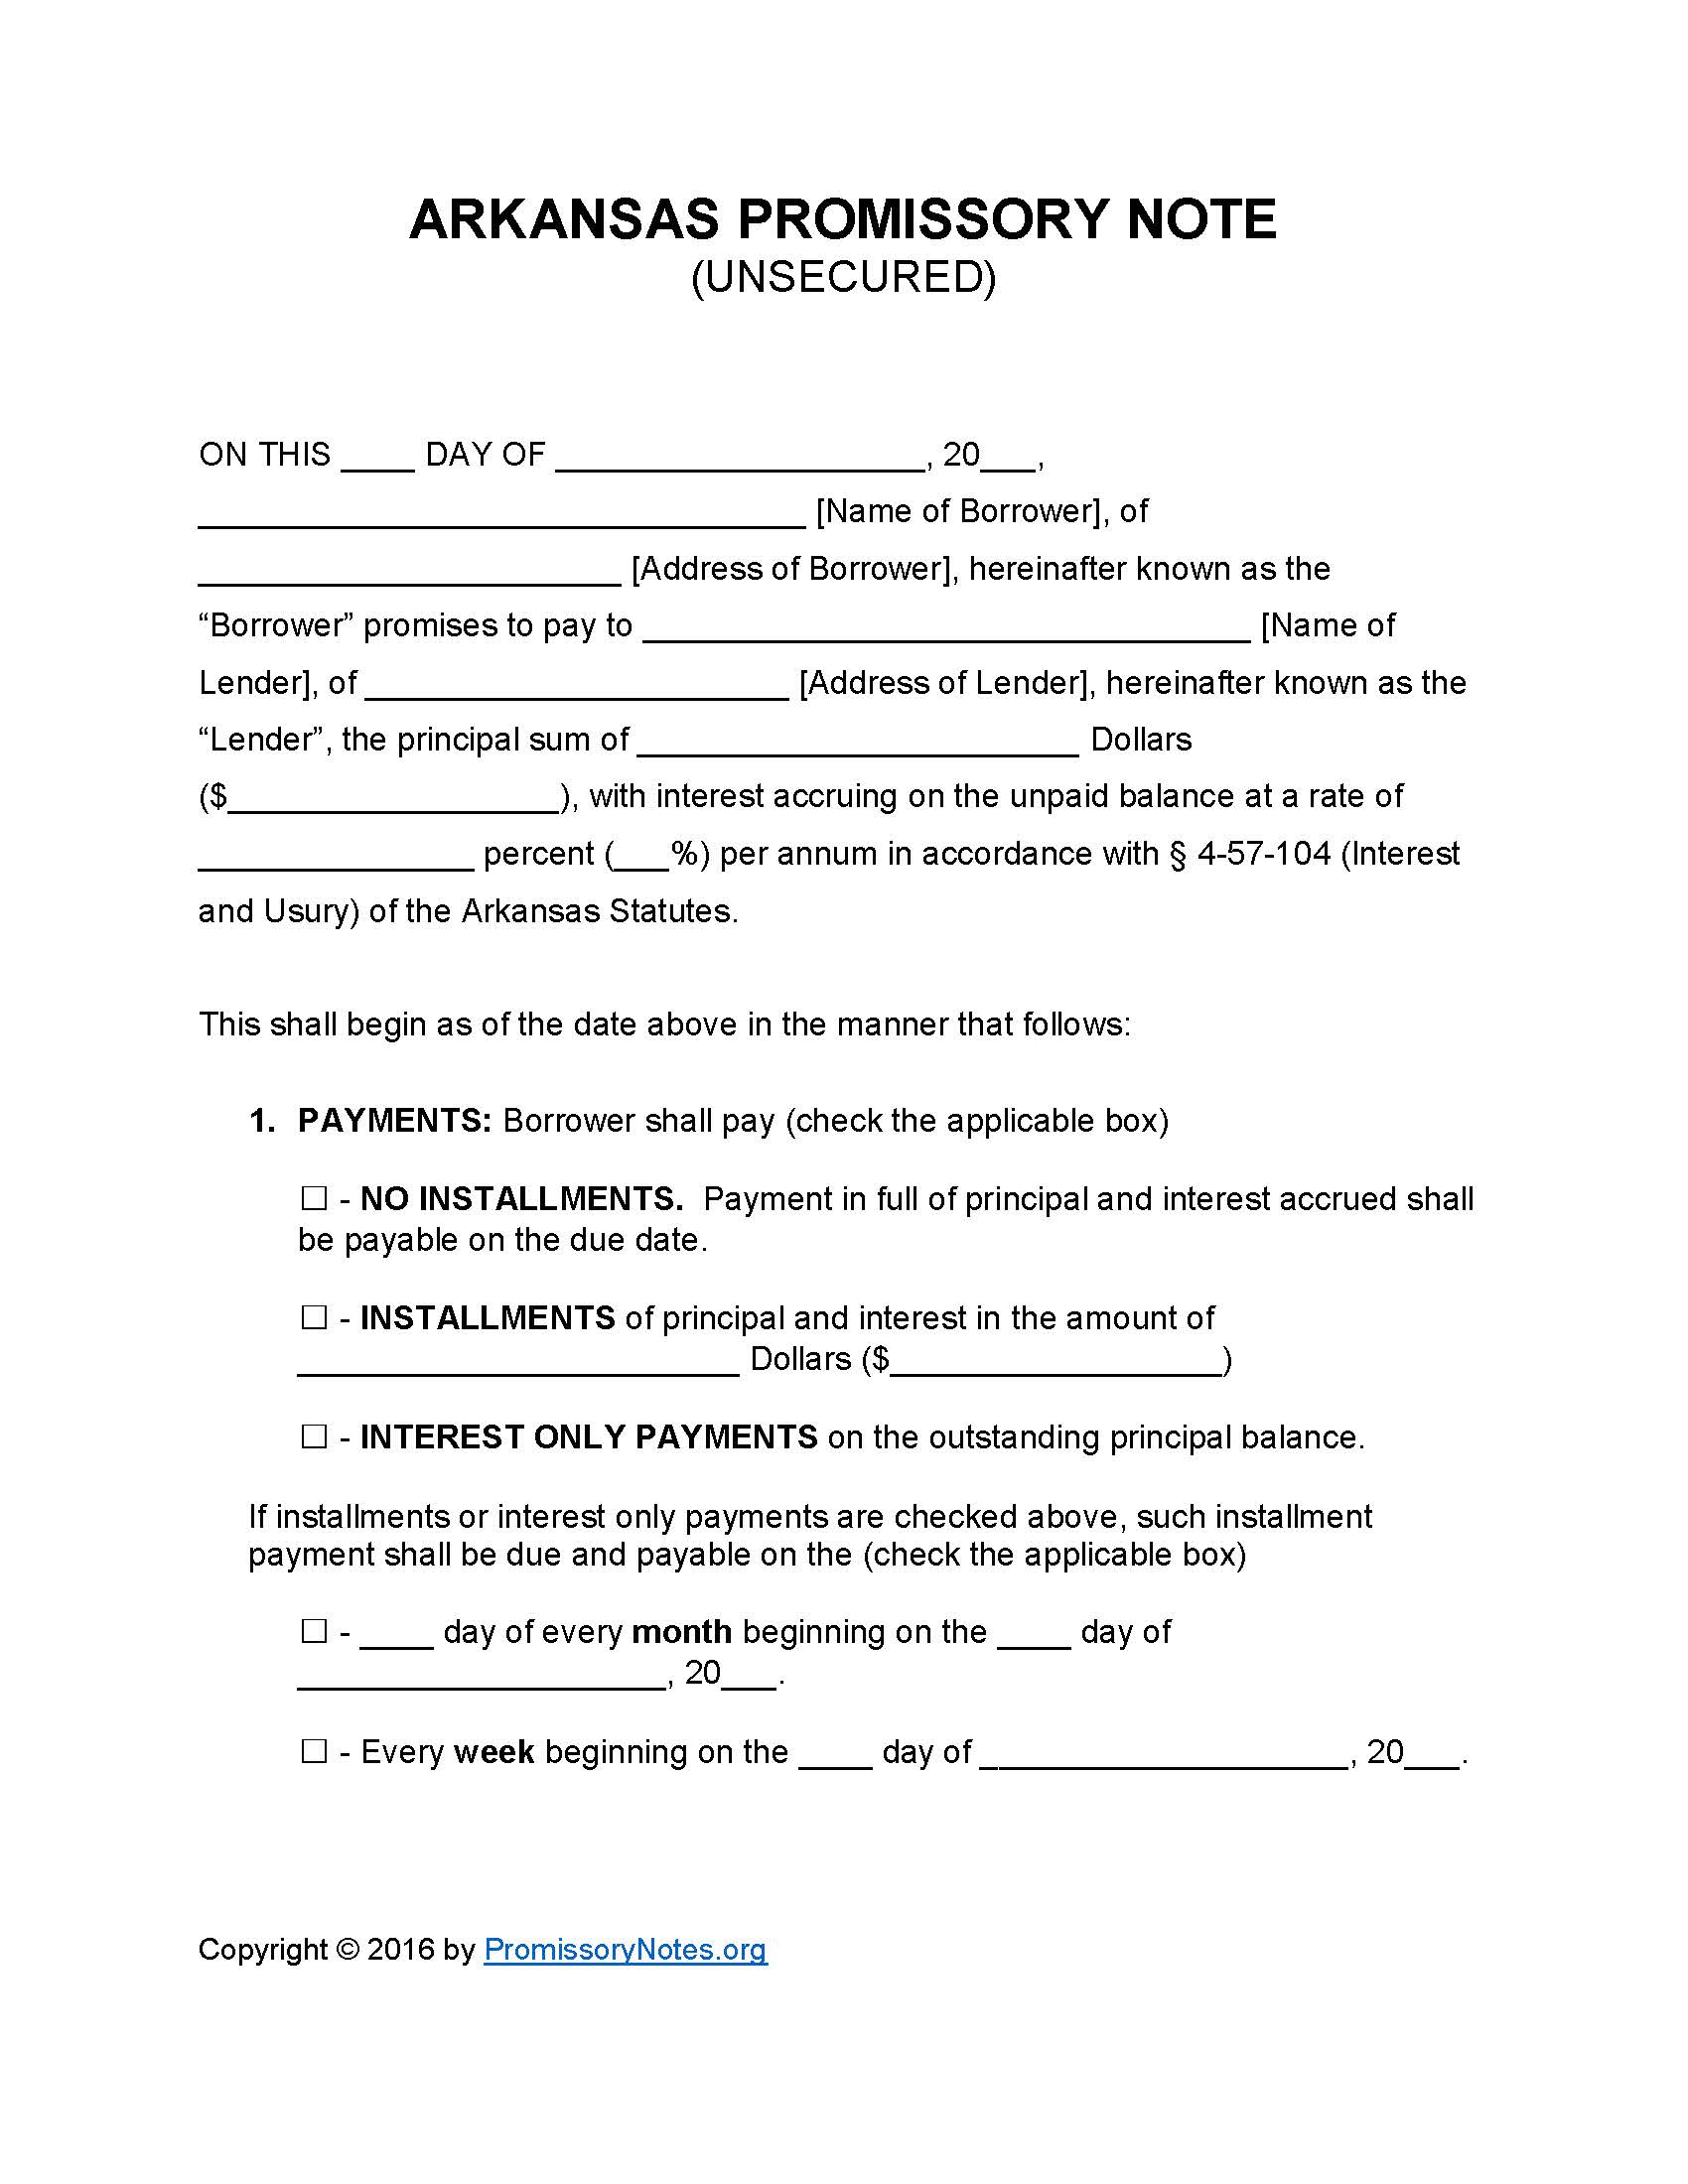 Arkansas Unsecured Promissory Note Template Promissory Notes Promissory Notes